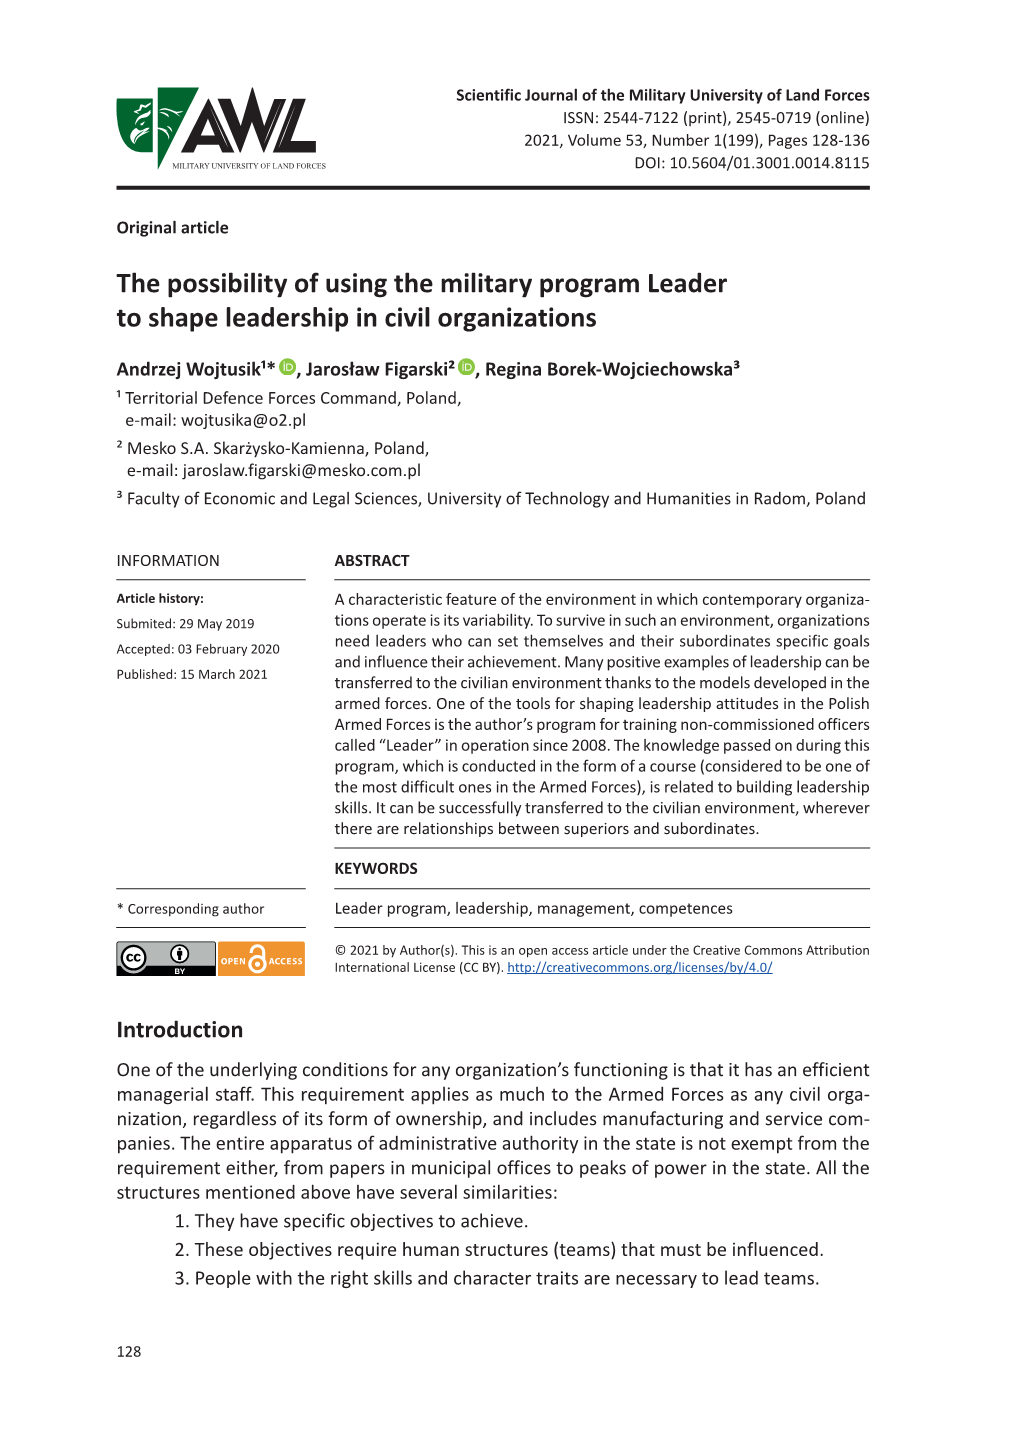 The Possibility of Using the Military Program Leader to Shape Leadership in Civil Organizations